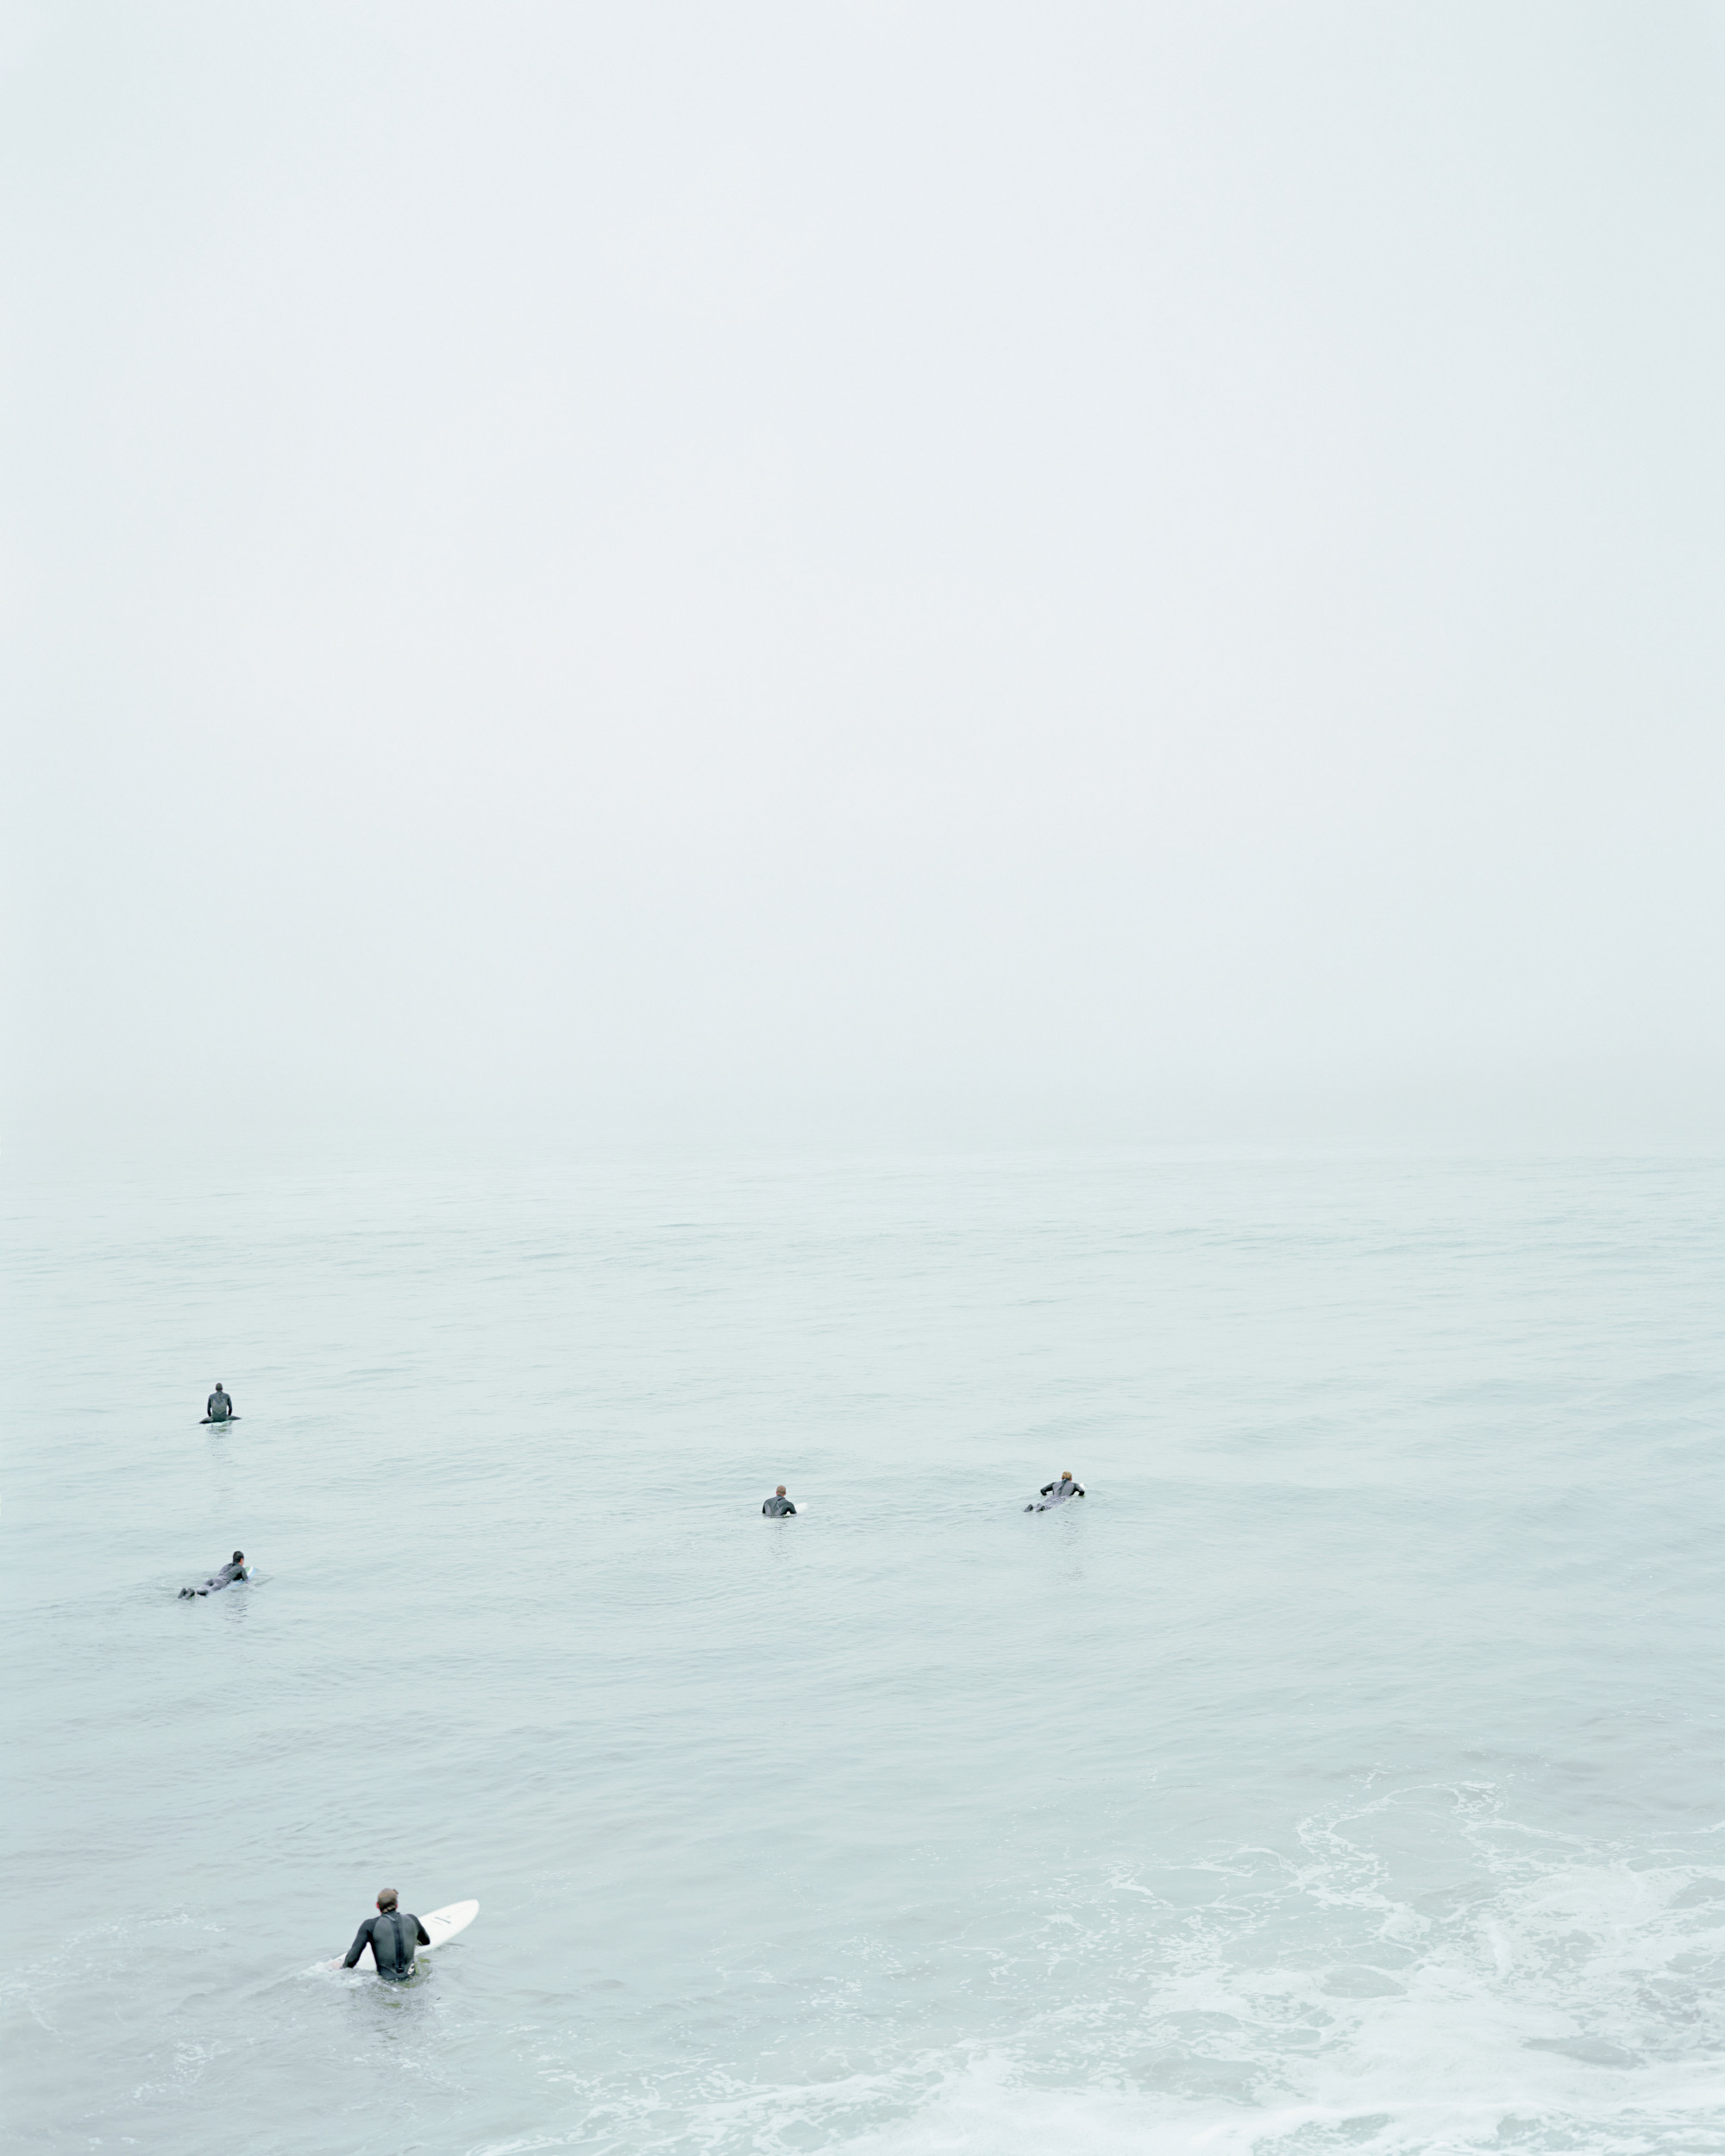 Untitled #4 (Surfers), 2009. Chromogenic print, 50 × 40 in. (127 × 101.6 cm). Picture credit: courtesy the artist and Regen Projects, Los Angeles; Lehmann Maupin, New York/Hong Kong/Seoul/London; Thomas Dane Gallery, London and Naples; and Peder Lund, Oslo